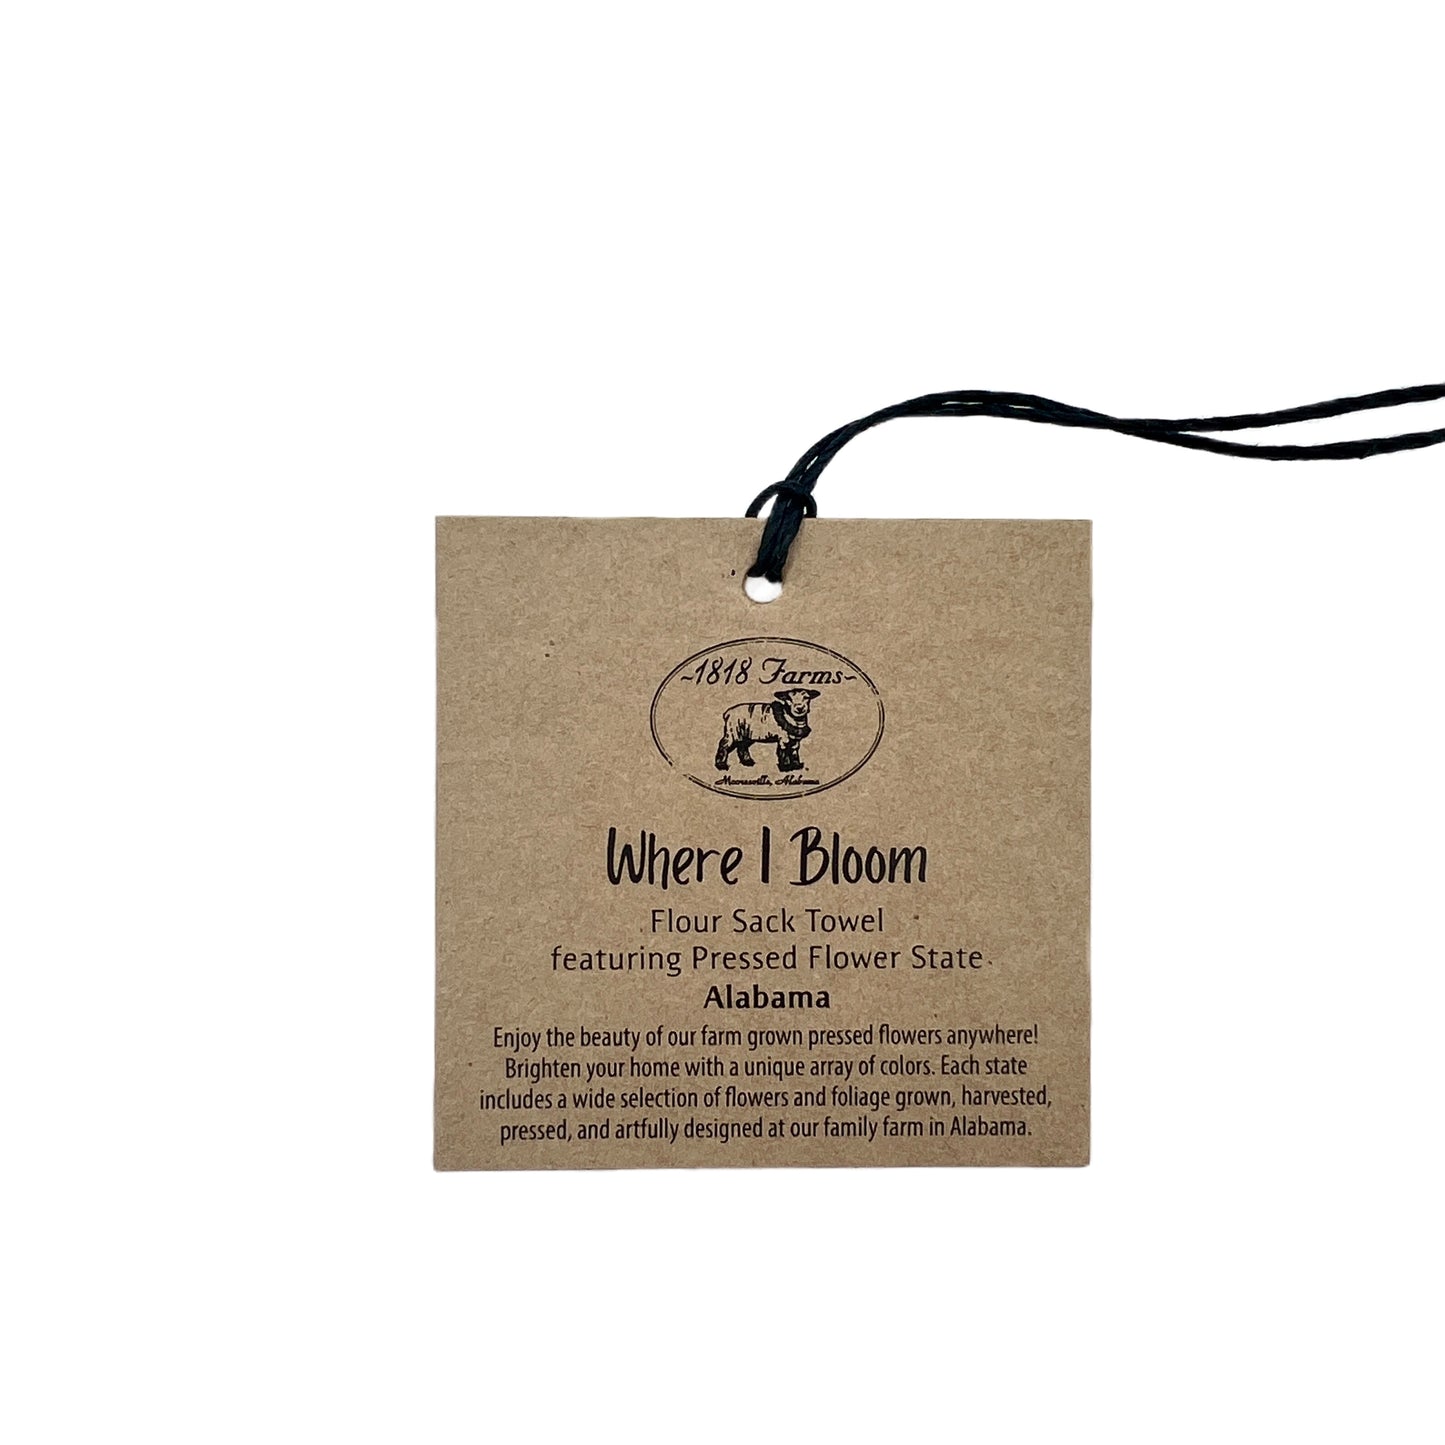 Alabama Themed Flour Sack Towel Featuring Dried, Pressed Flowers - "Where I Bloom" Collection Towel 1818 Farms   